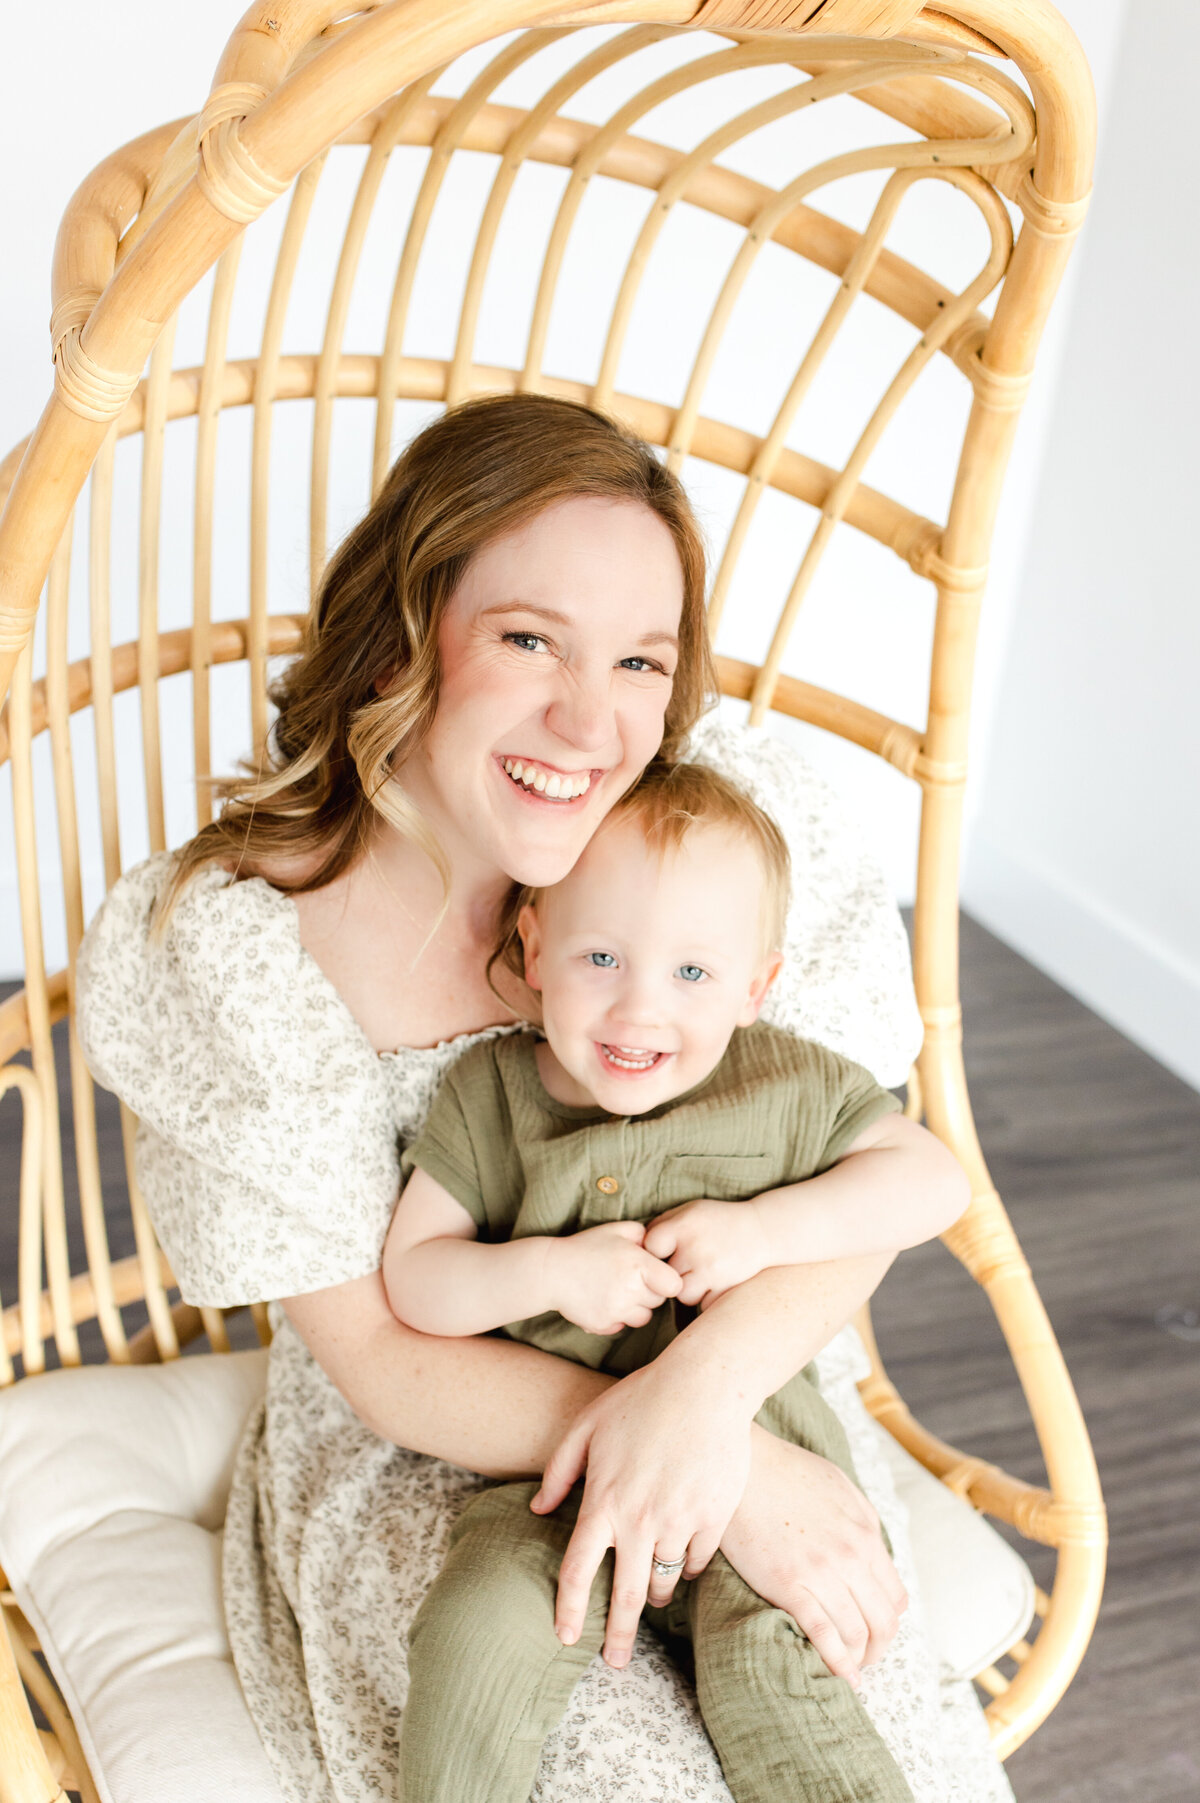 A brown haired woman sits in a rattan chair wearing a floral dress holding a toddler boy wearing a green outfit and sitting in front of a white backdrop